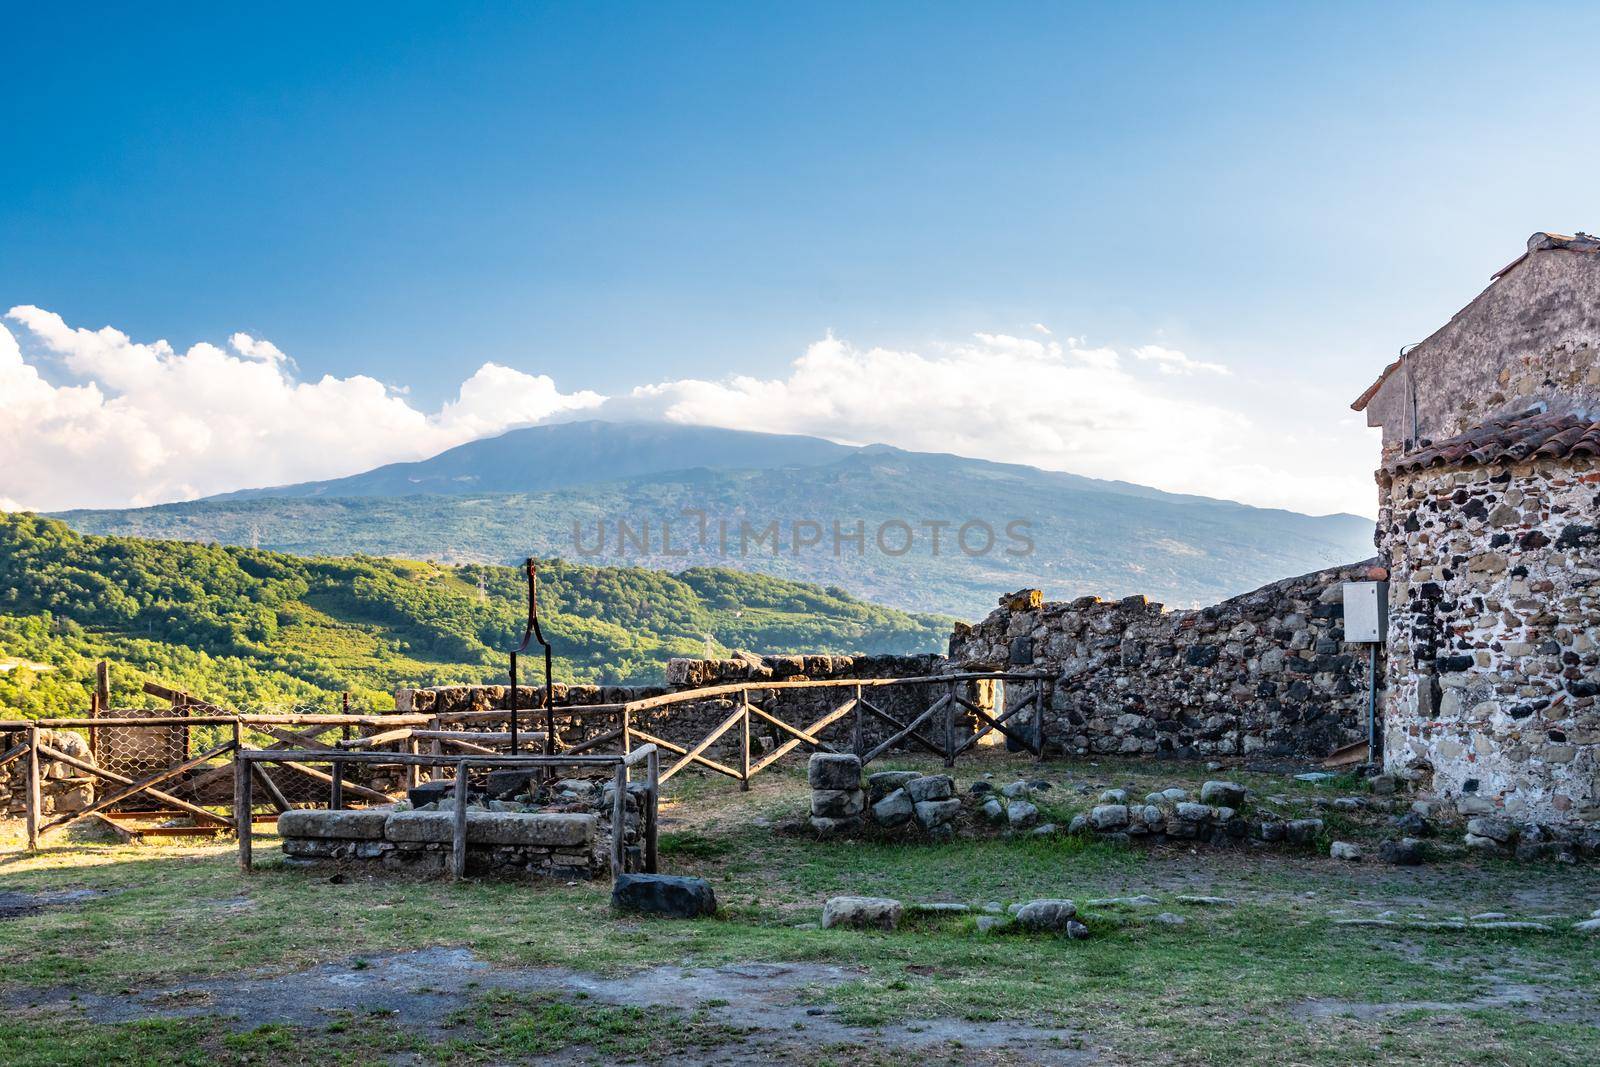 Smoking Mount Etna Volcano from Lauria Castle terrace illuminated by afternoon sun in Castiglione di Sicilia, Italy